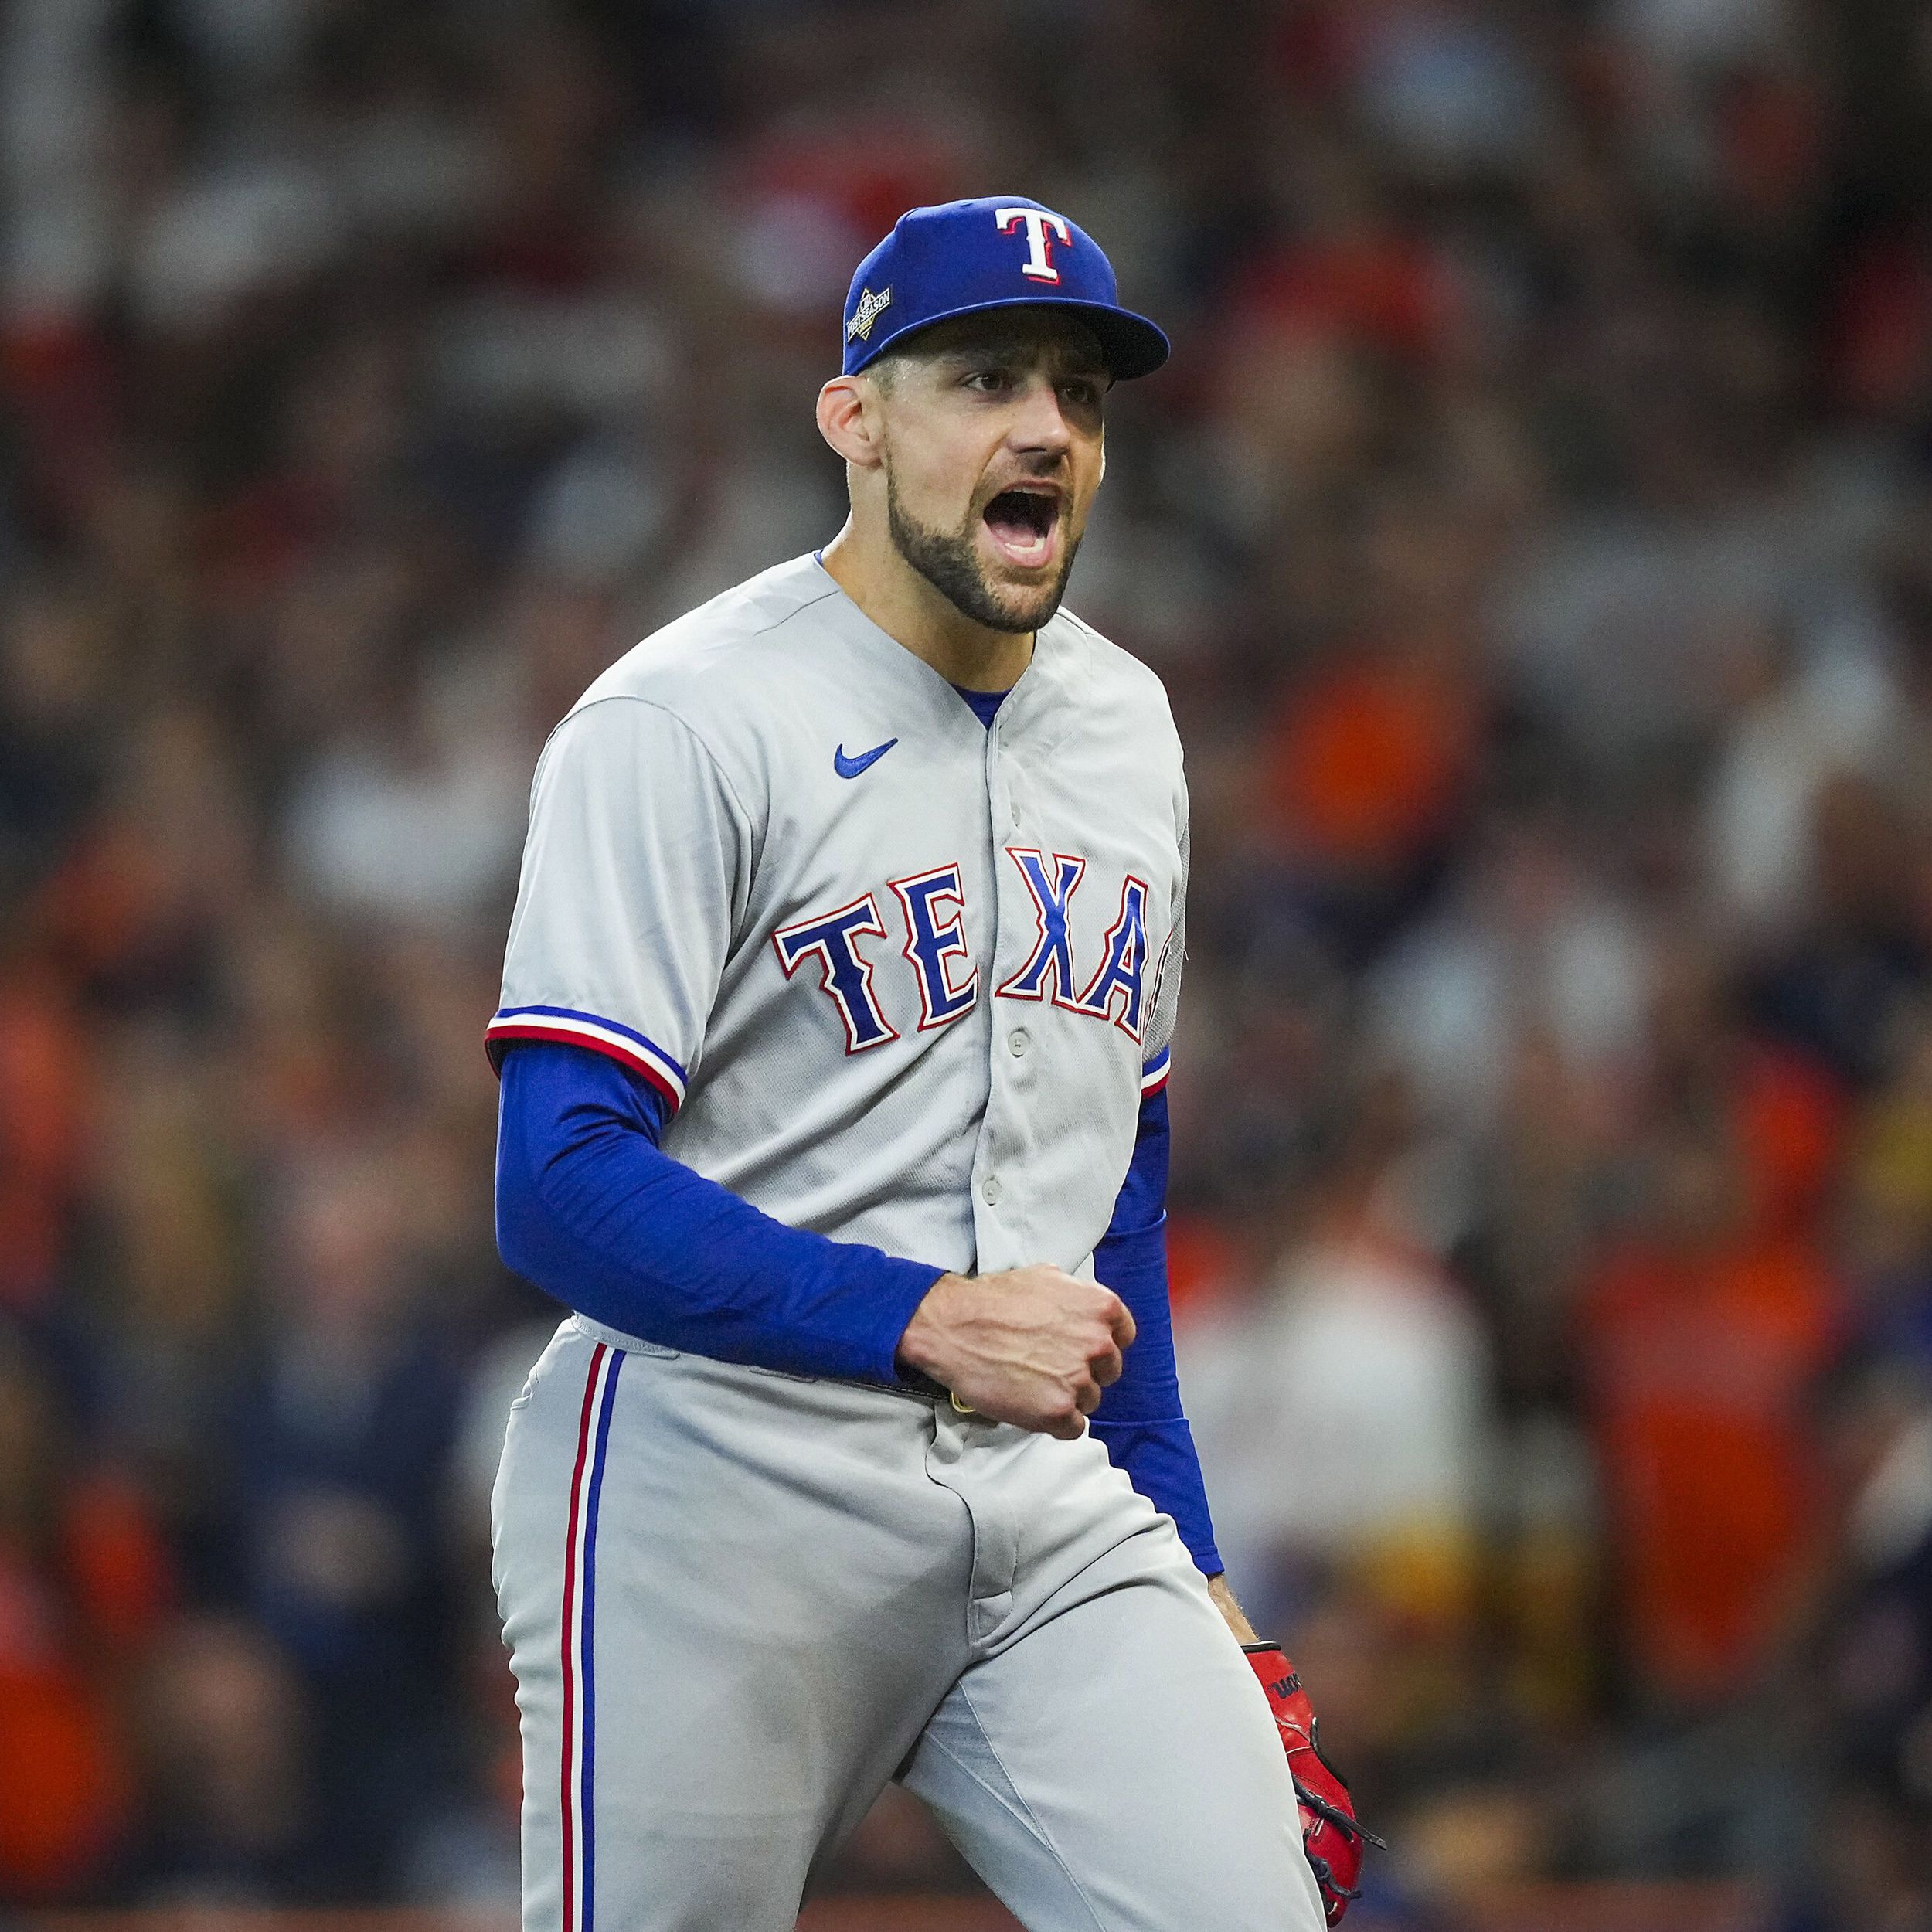 Nathan Eovaldi takes the mound with a chance to save the Rangers' season